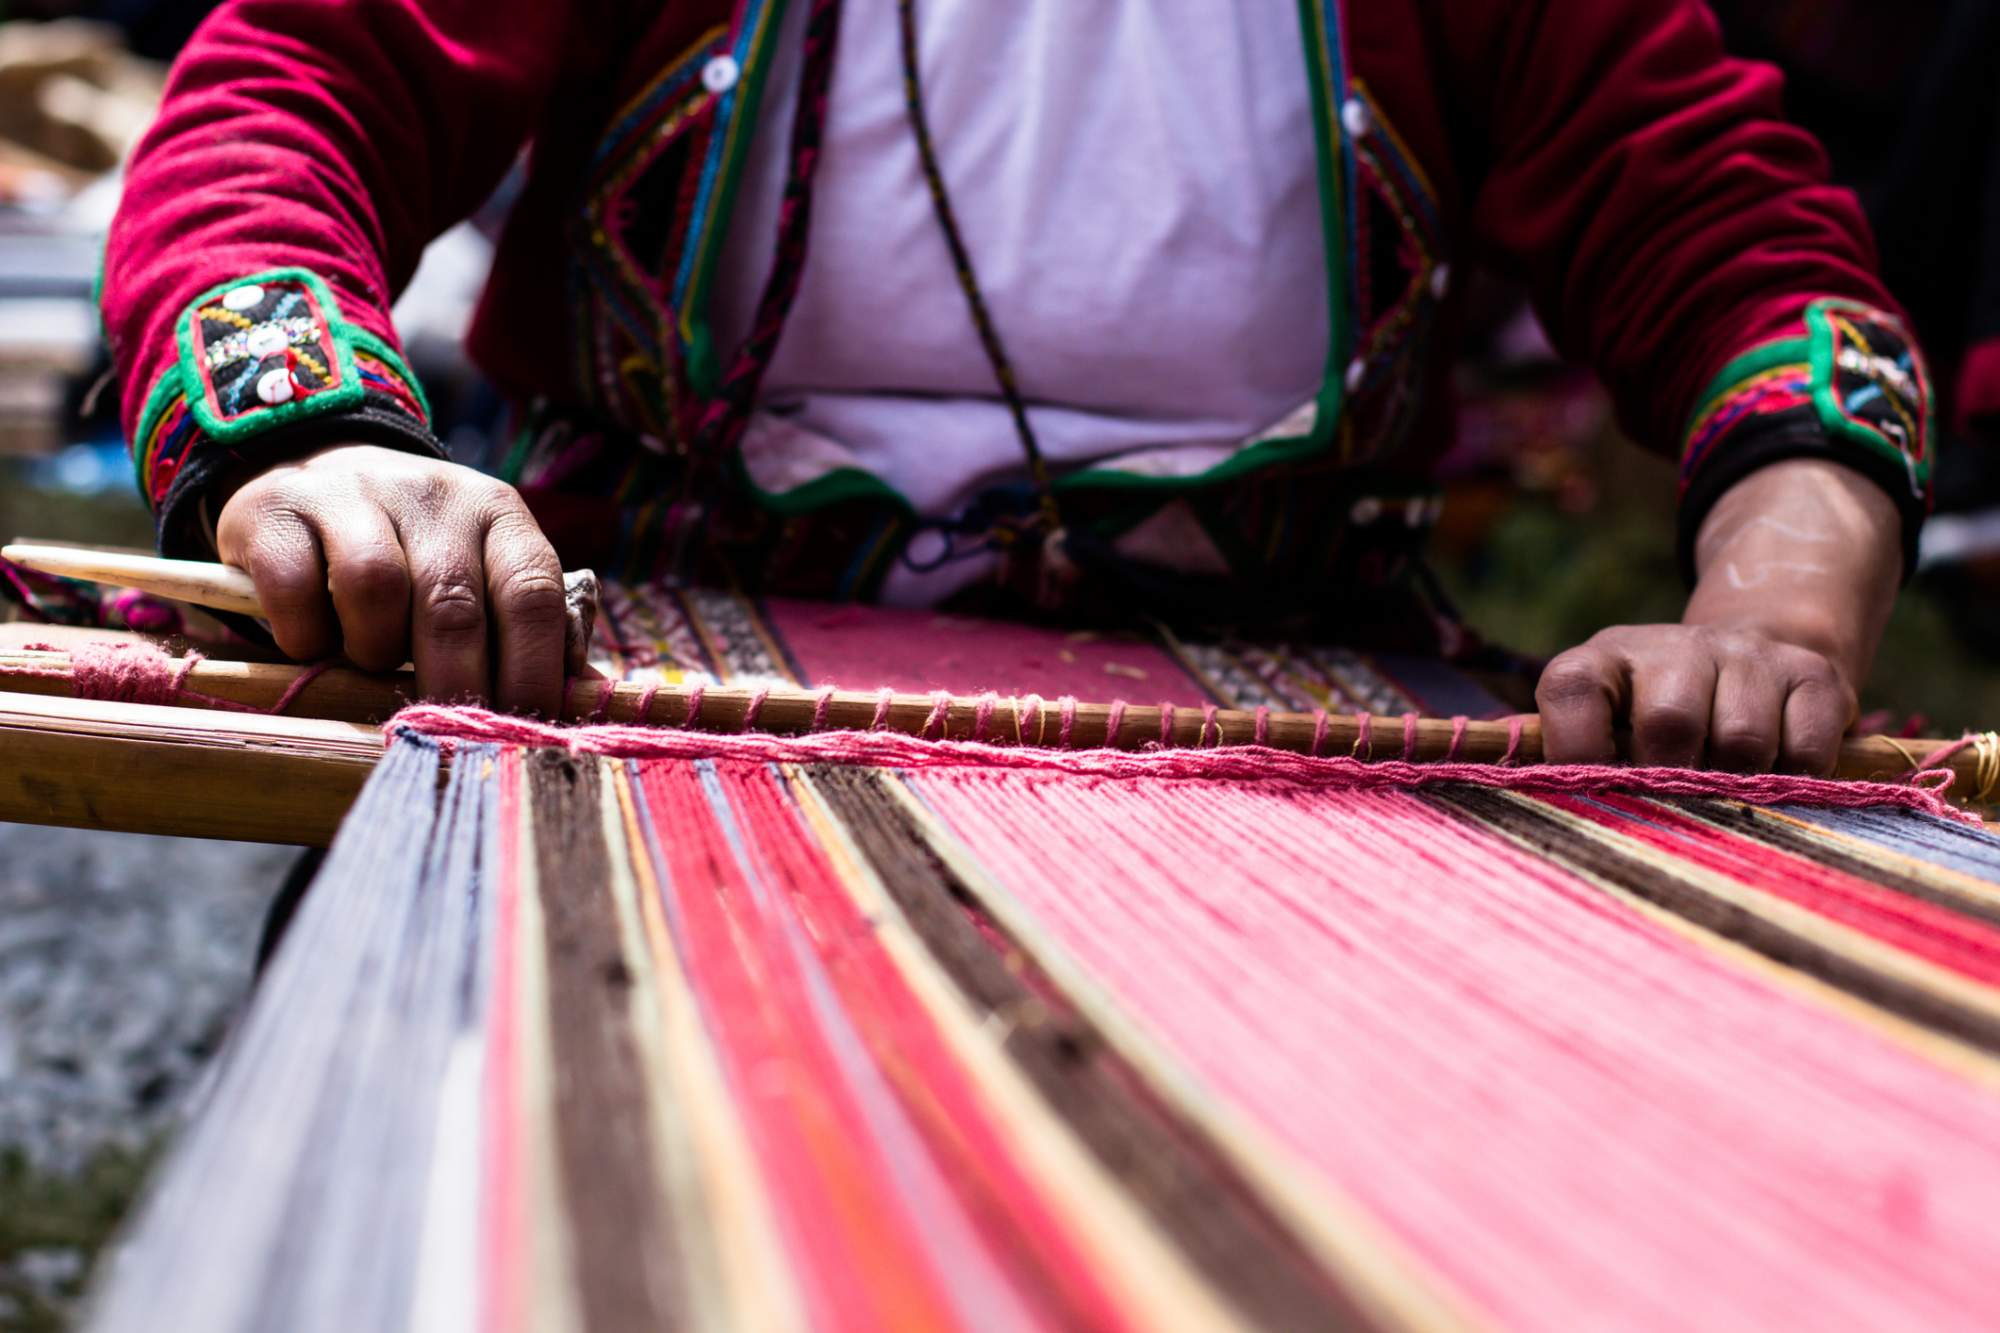 Traditional hand weaving in the Andes Mountains in Peru